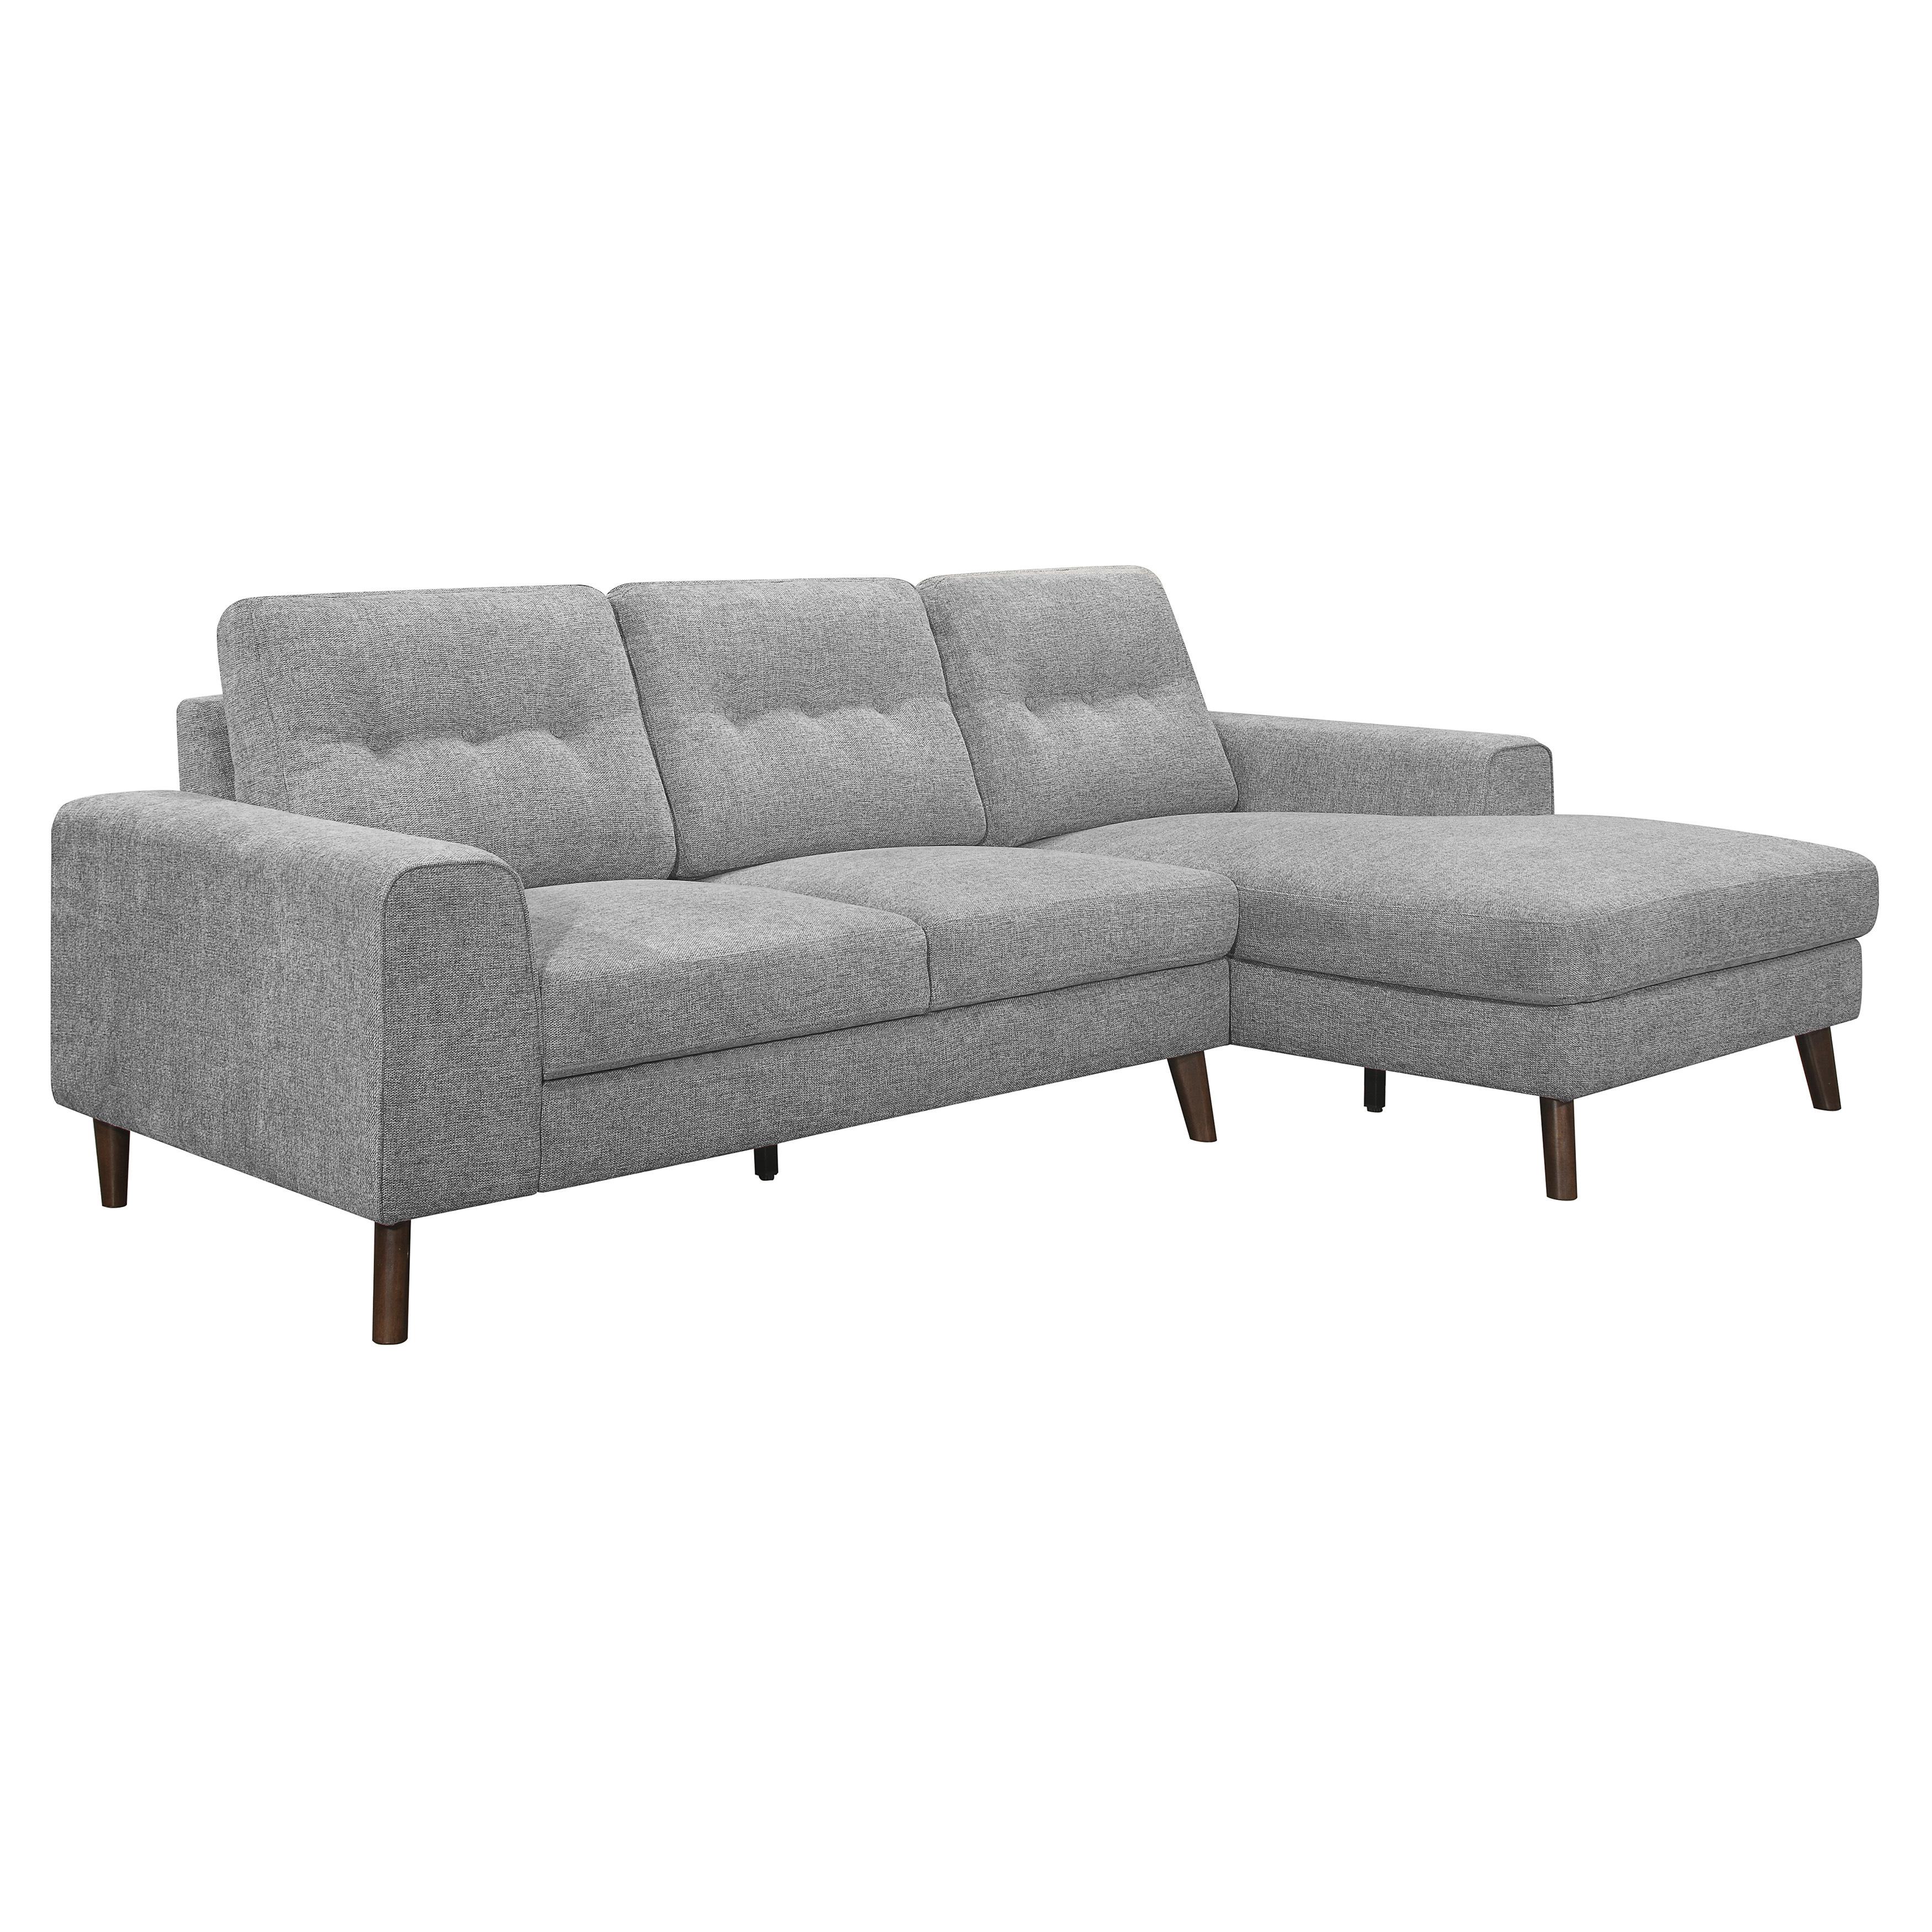 

    
Contemporary Gray Textured 2-Piece Sectional Homelegance 9300GY*SC Alexia
